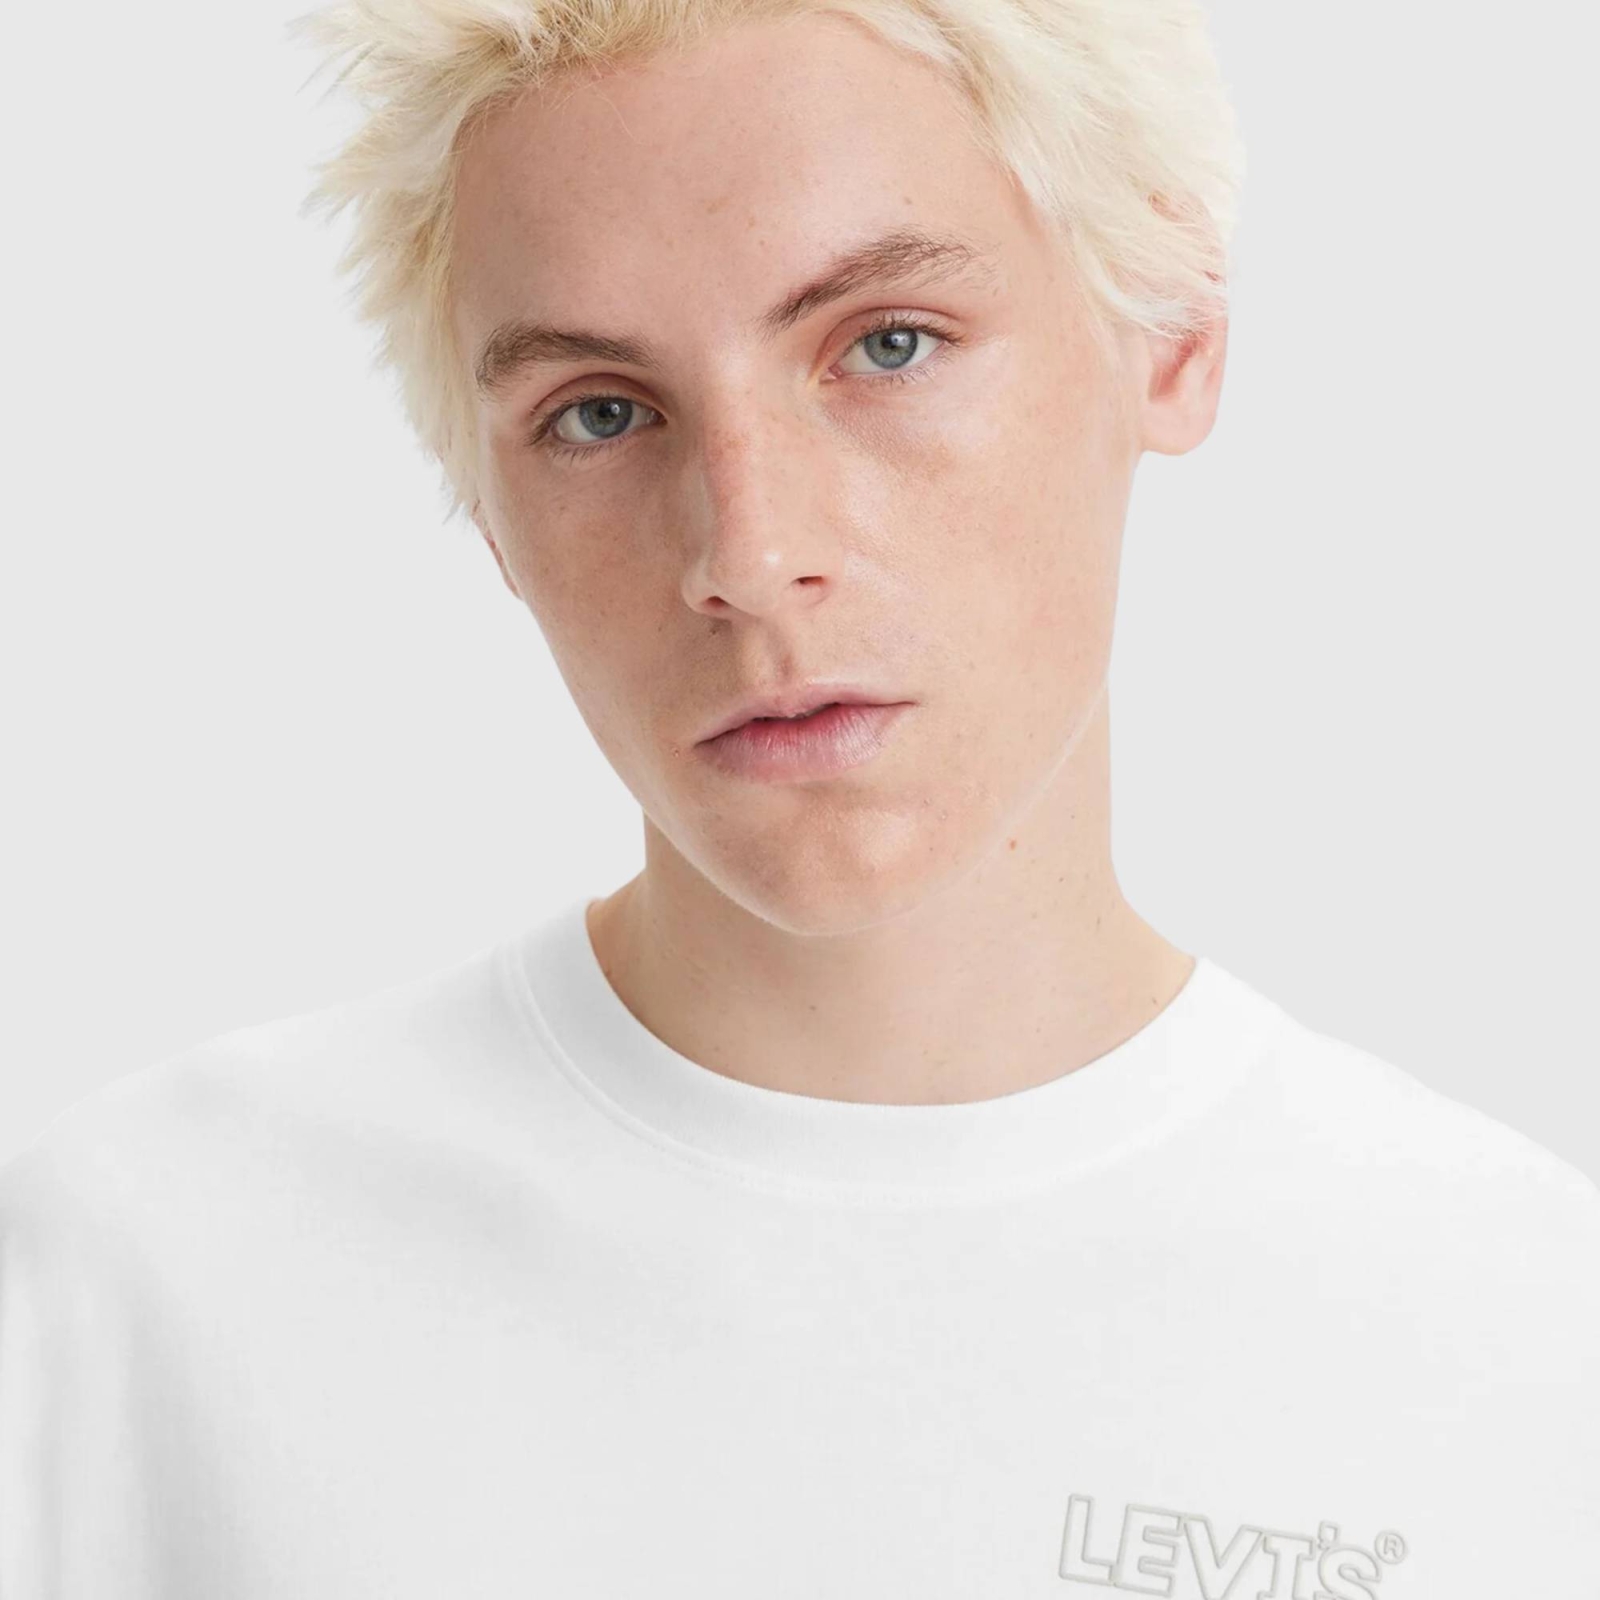 LEVI'S SS RELAXED FIT TEE